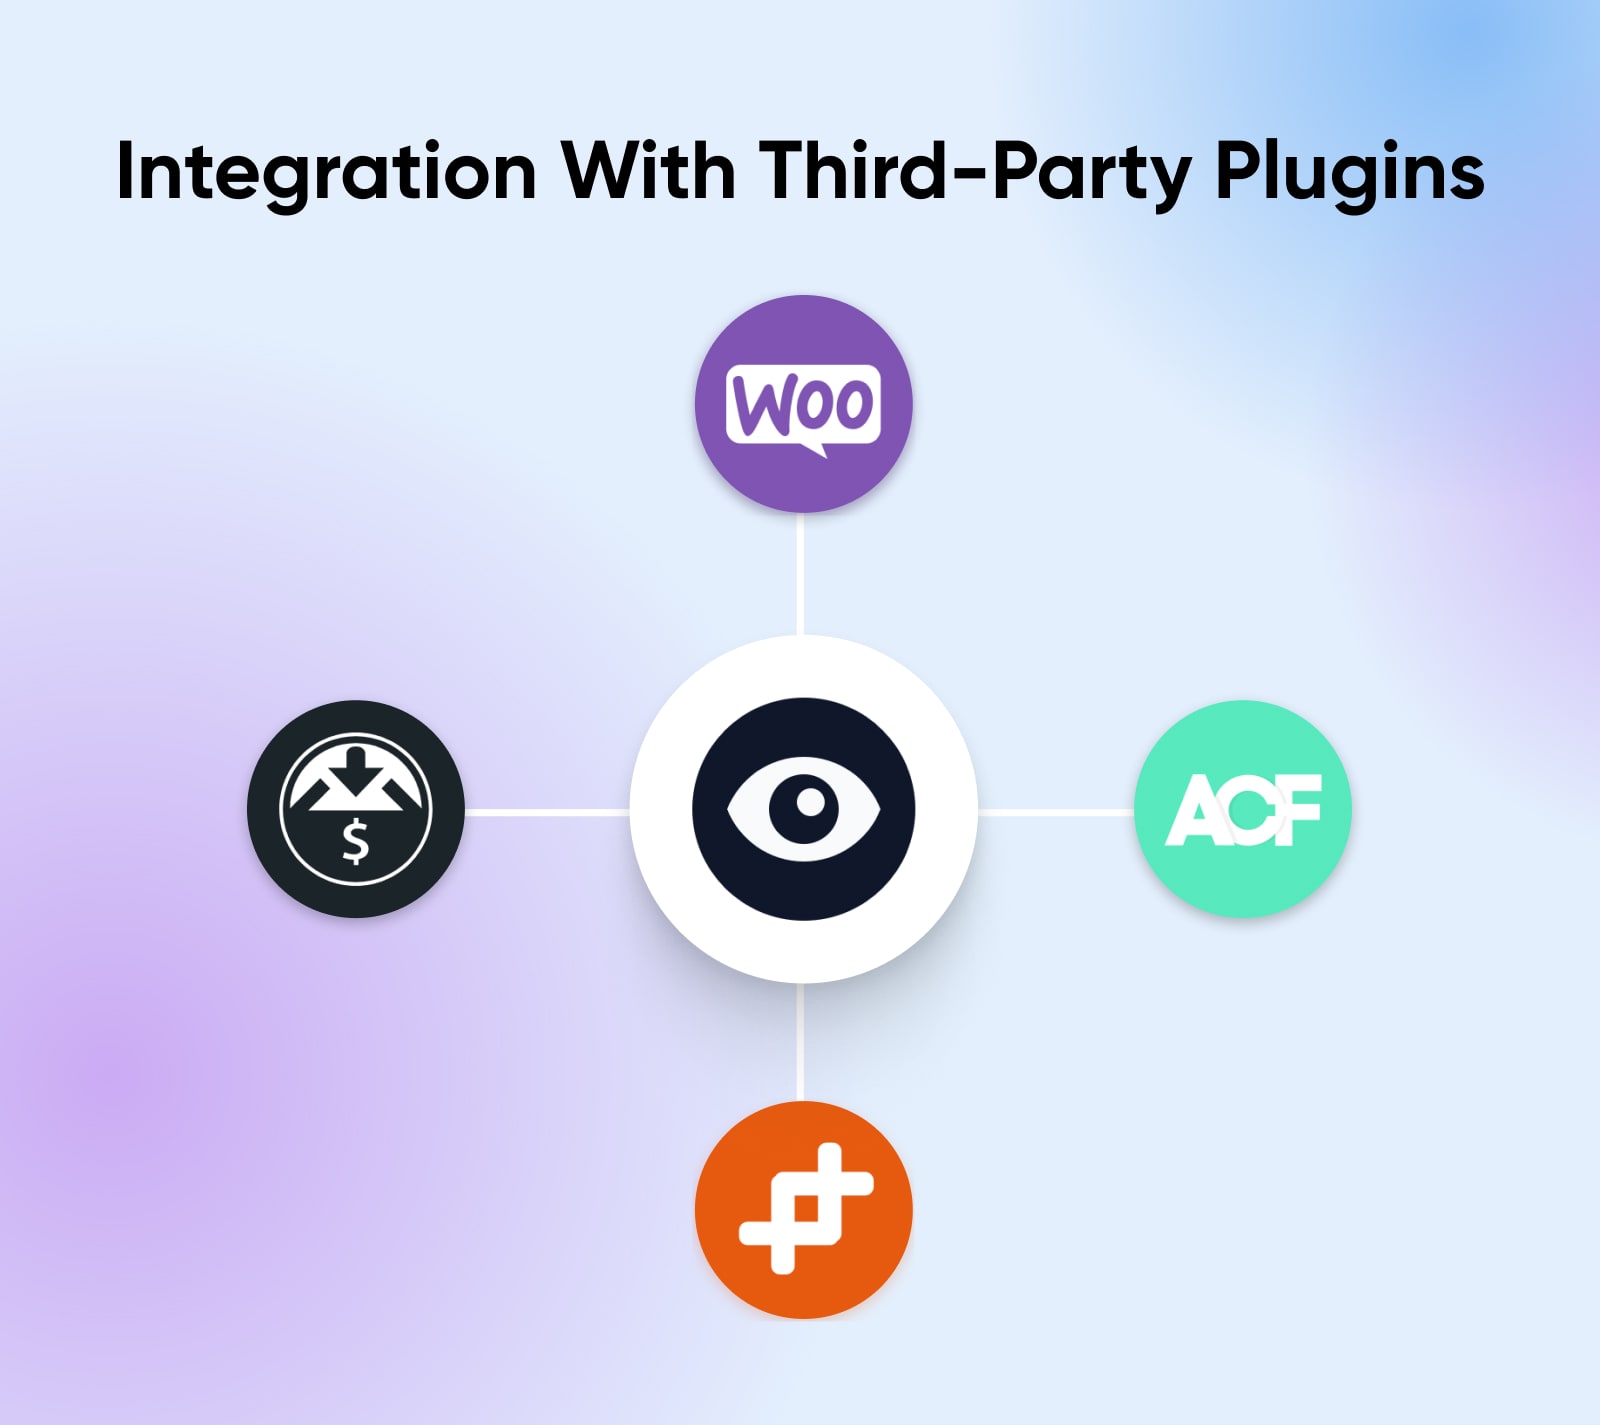 integration with third party plugins like woo and ACF